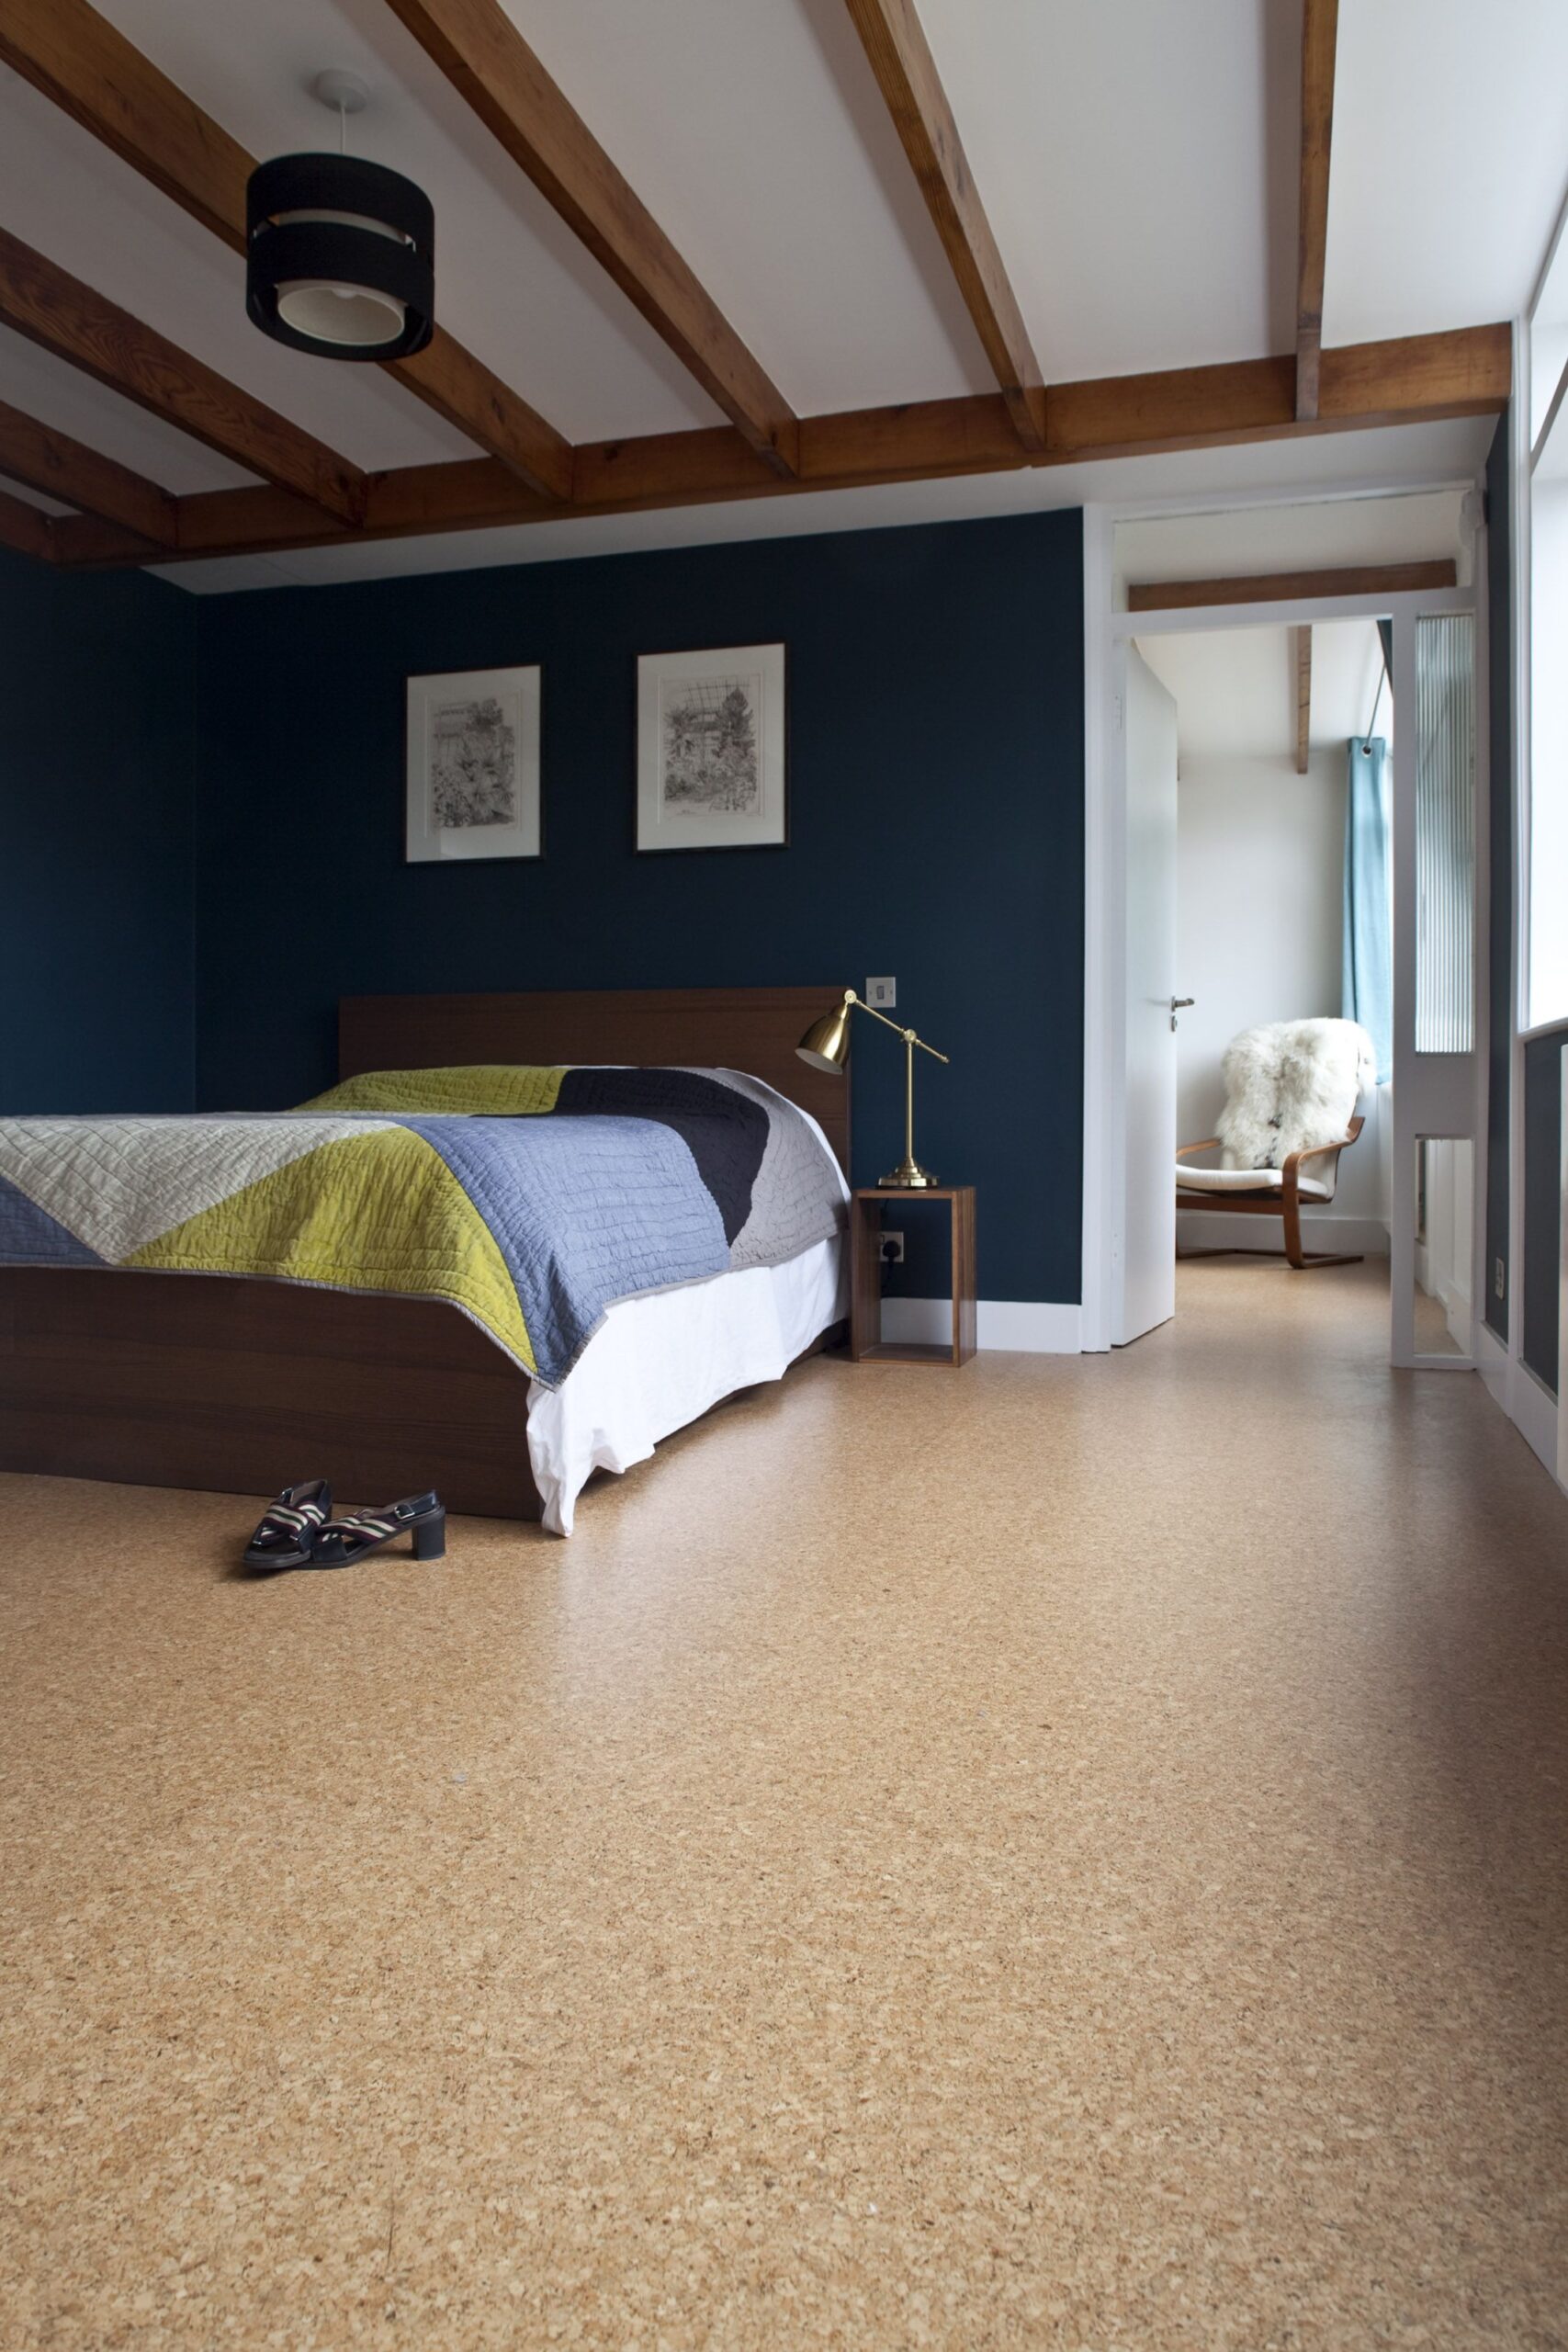 The Benefits of Cork Flooring for Your
Home